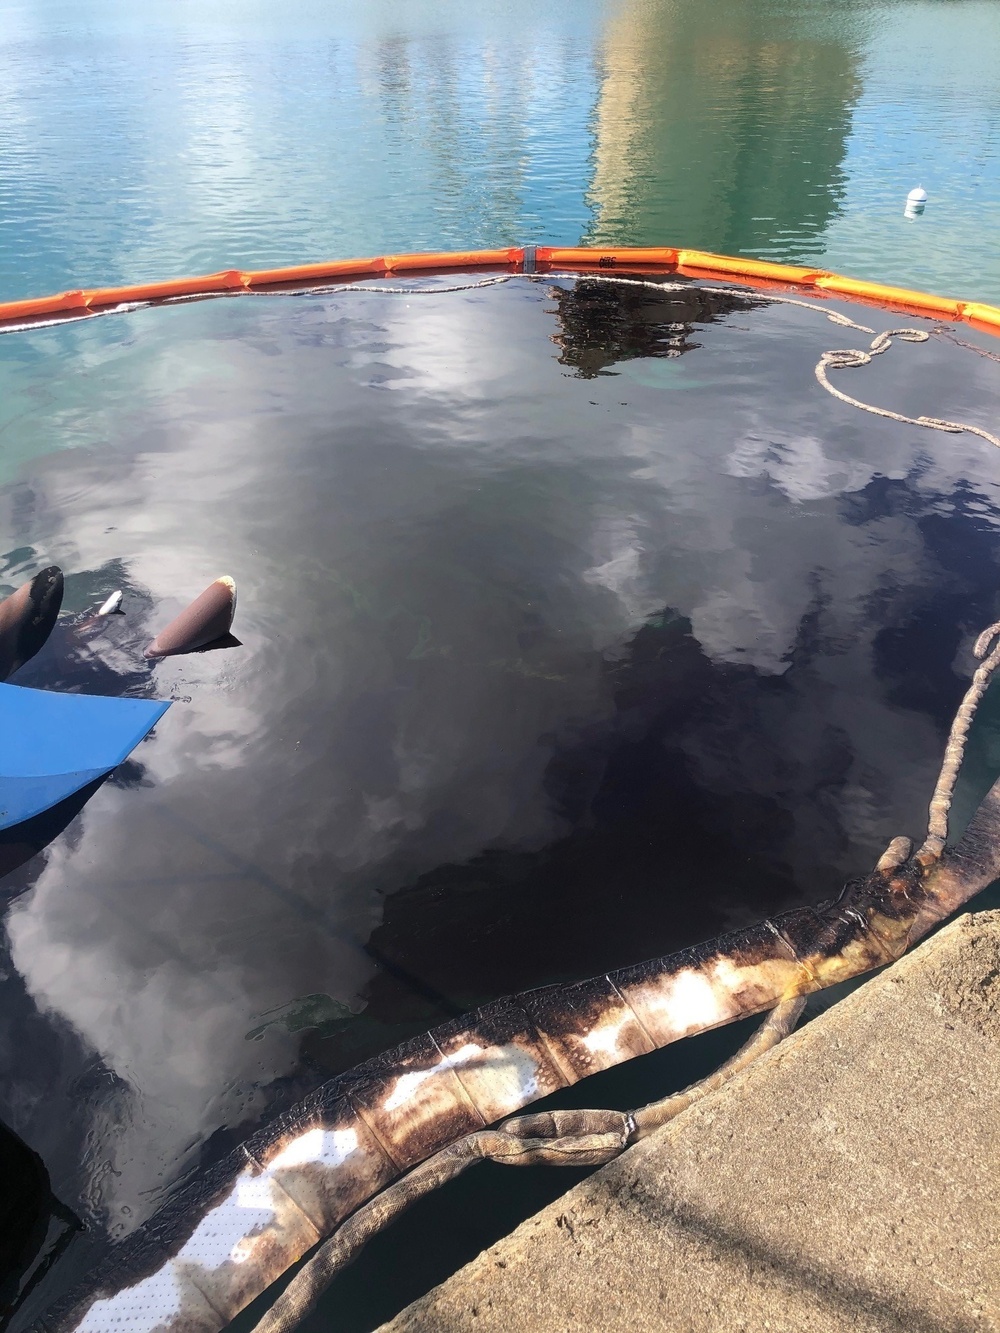 Coast Guard responds to oil discharge from partially sunken tugboat in St. Croix, U.S. Virgin Islands